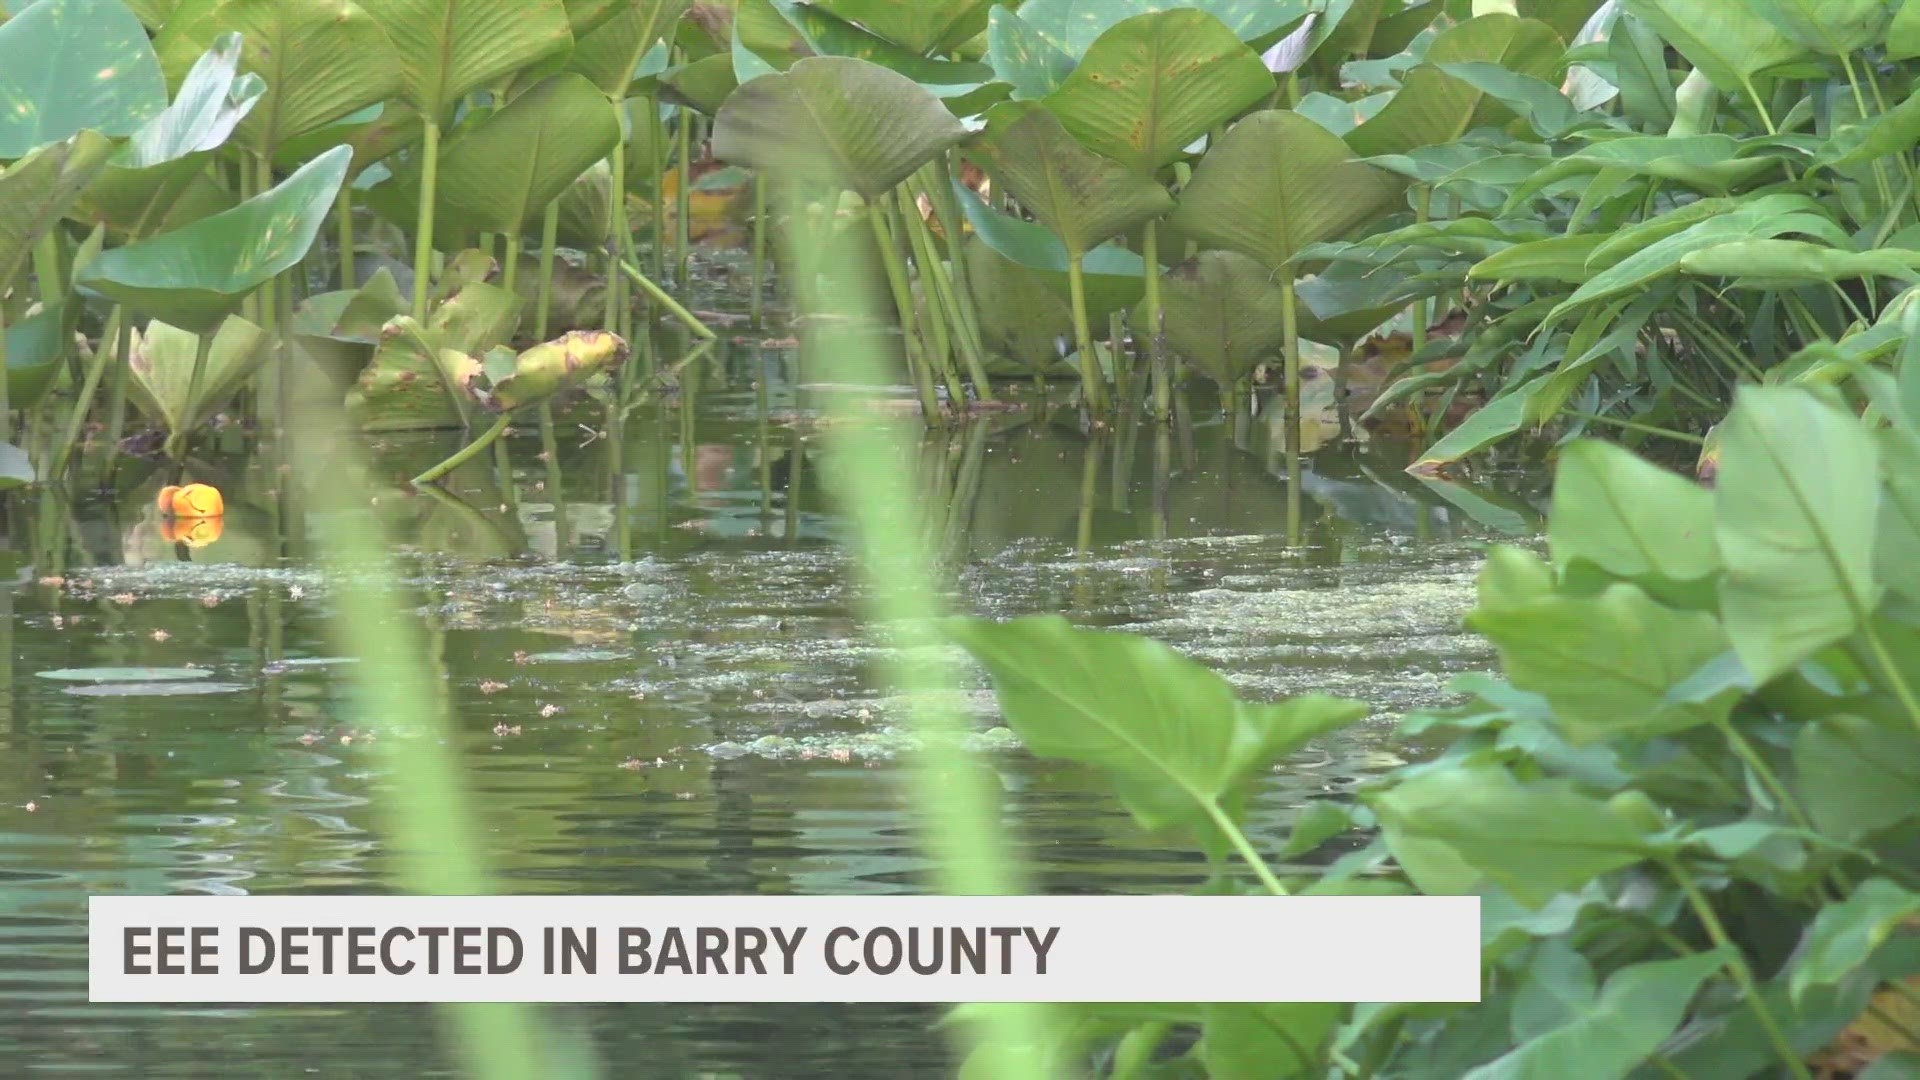 Although it's unknown what part of the county the mosquito was found in Barry joins Bay County as another area in the state testing positive for Triple E.